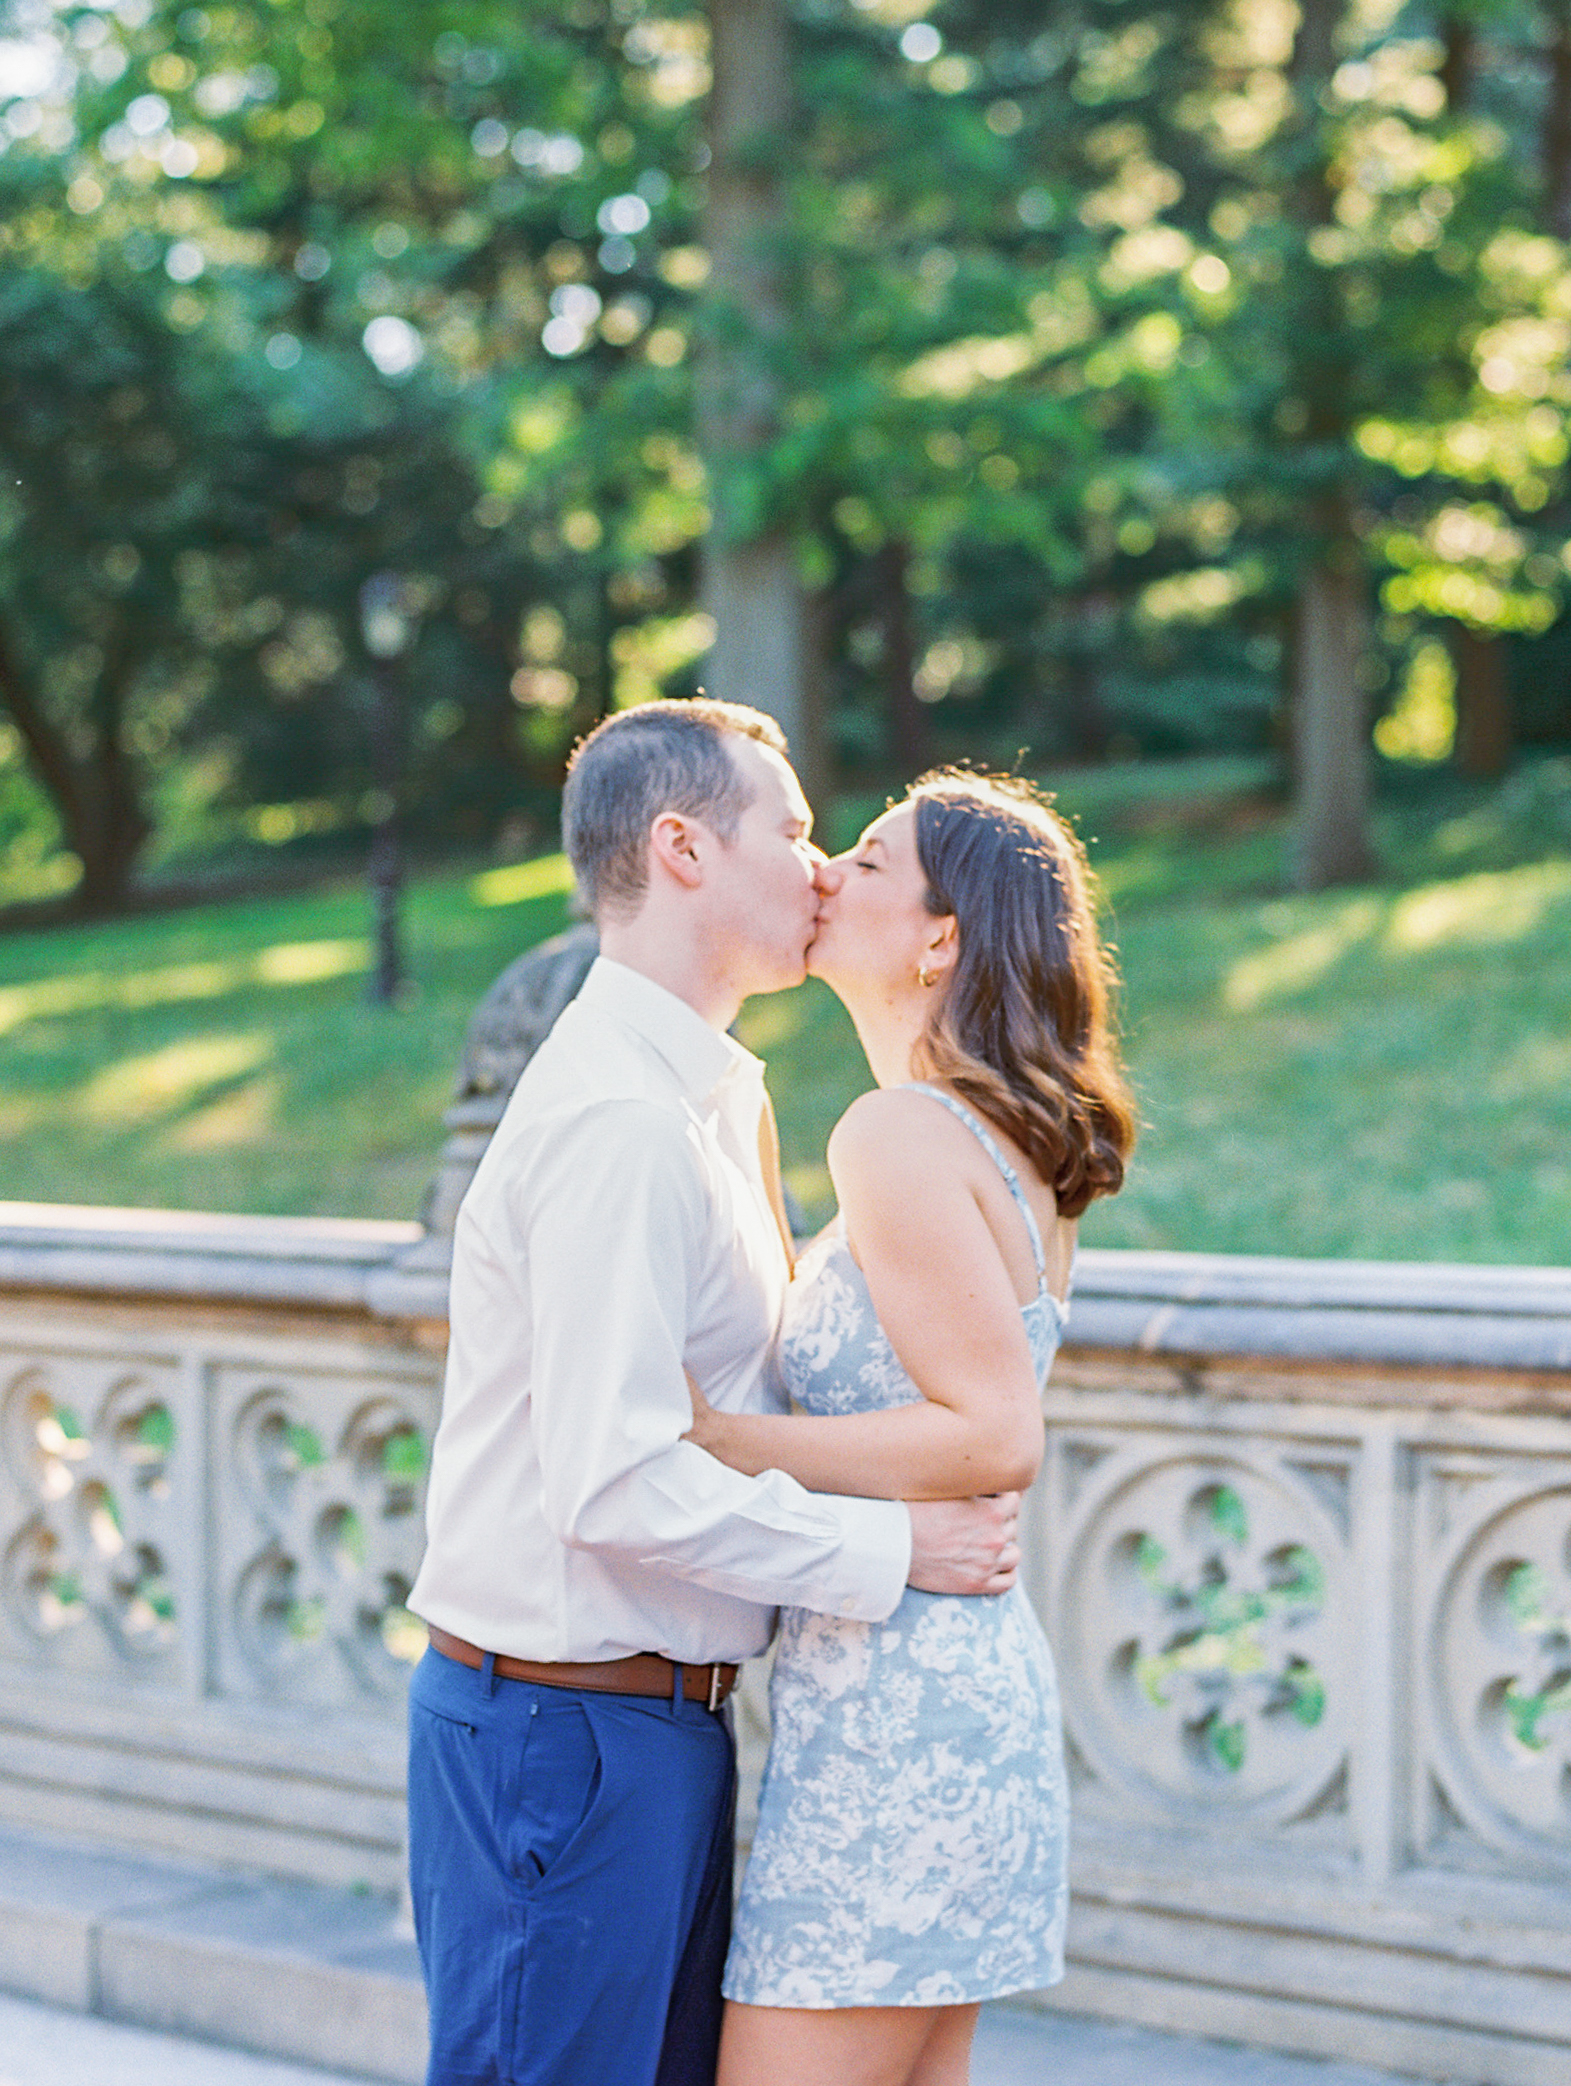 Couple embrace and kiss in park for Central Park Engagement Photos